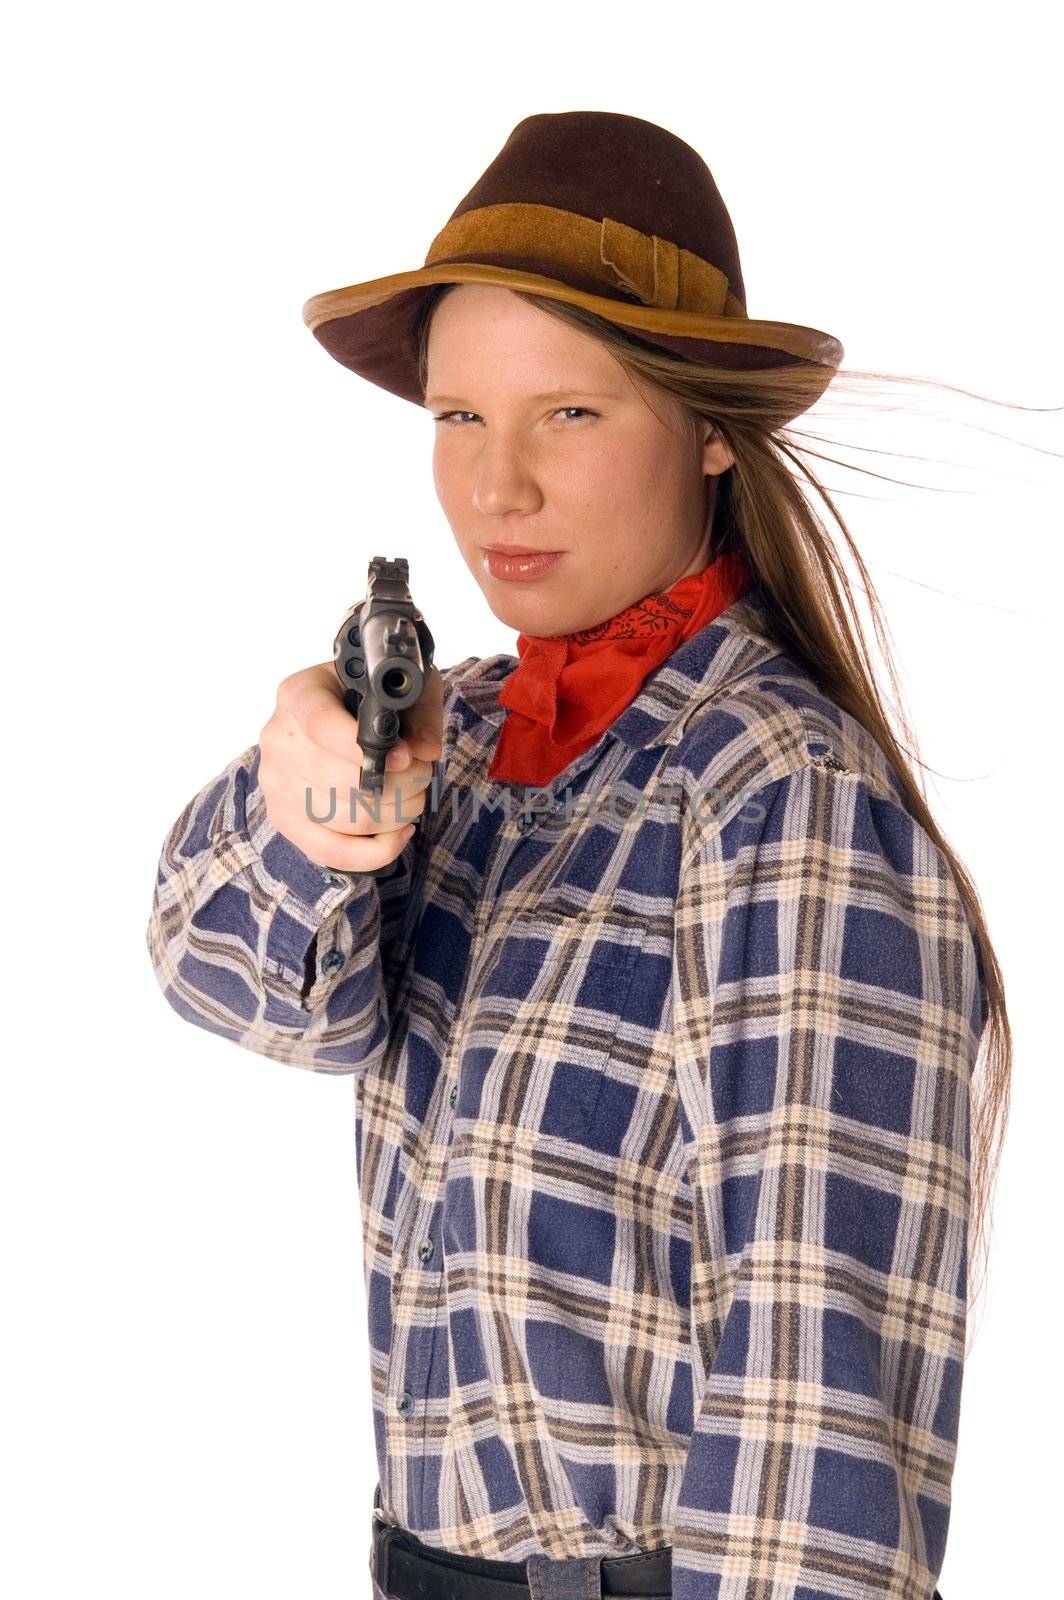 Smiling cowgirl with gun aim at someone by lilsla